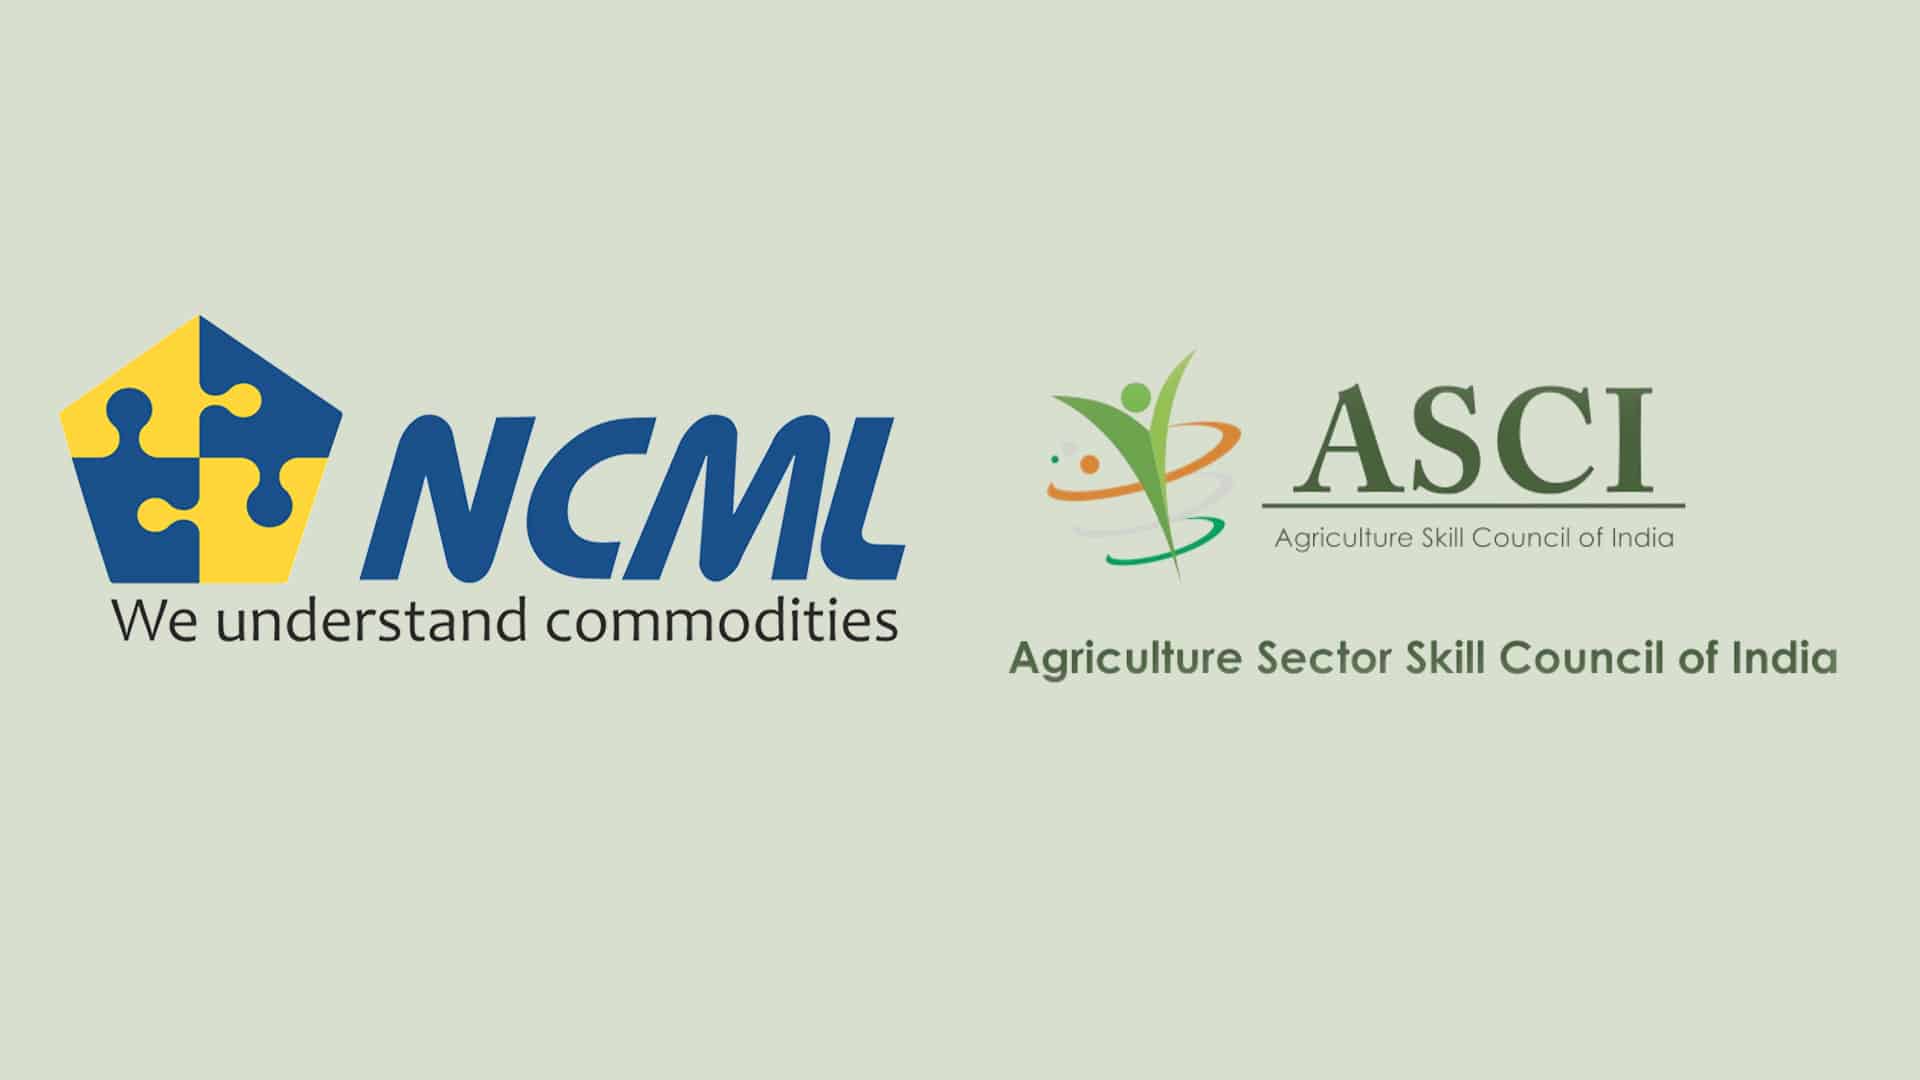 NCML ties up with ASCI to provide skill training in the agriculture sector